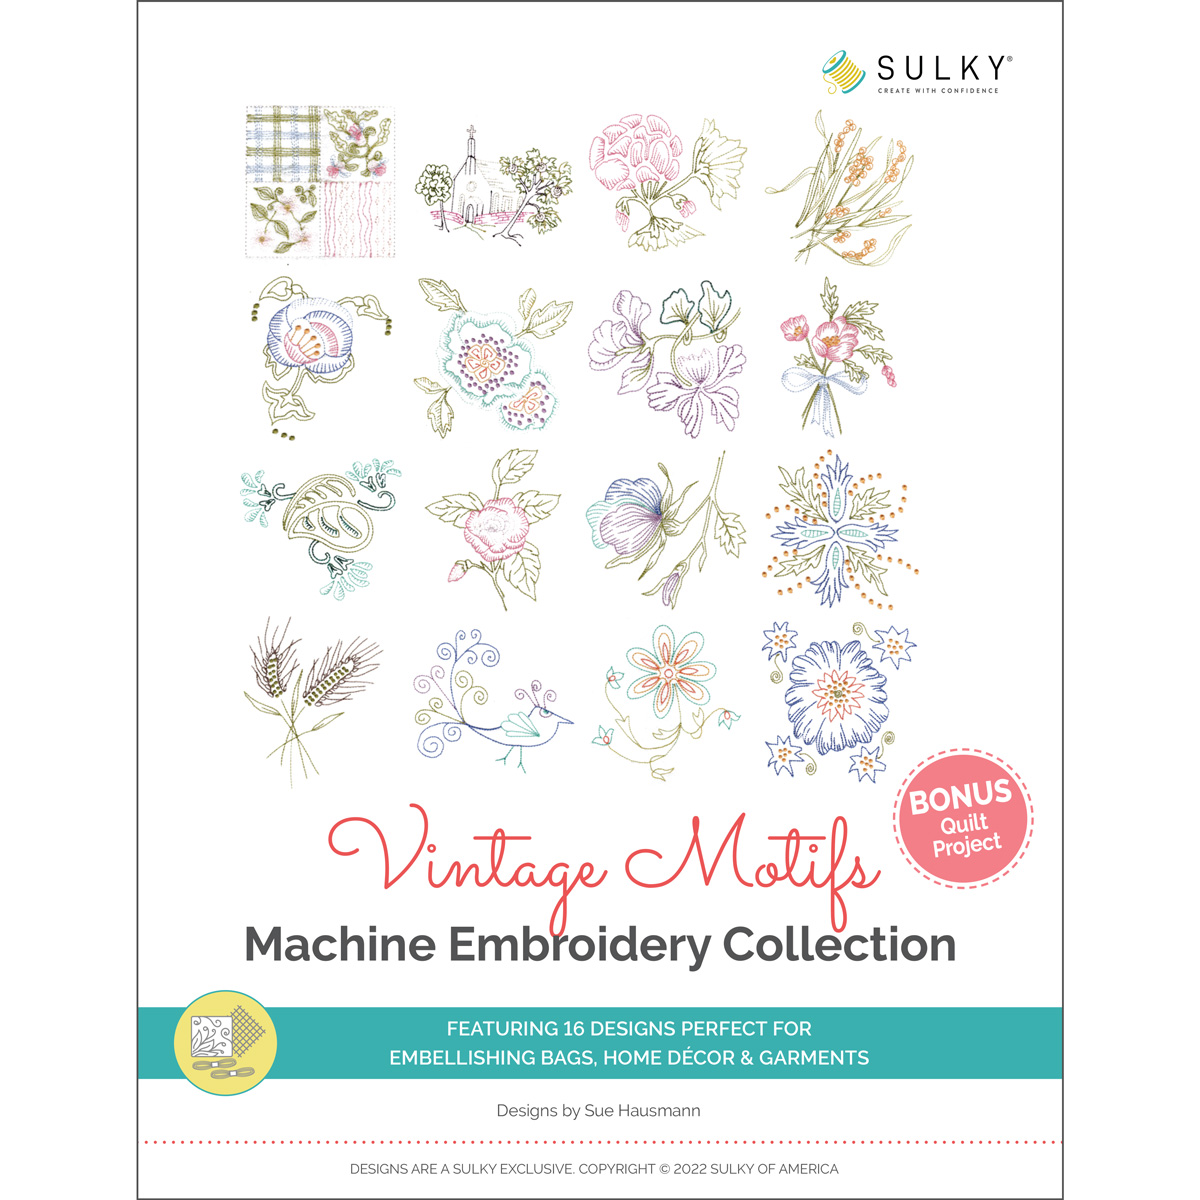 Vintage Motifs - Machine Embroidery Collection by Sue Hausmann Questions & Answers